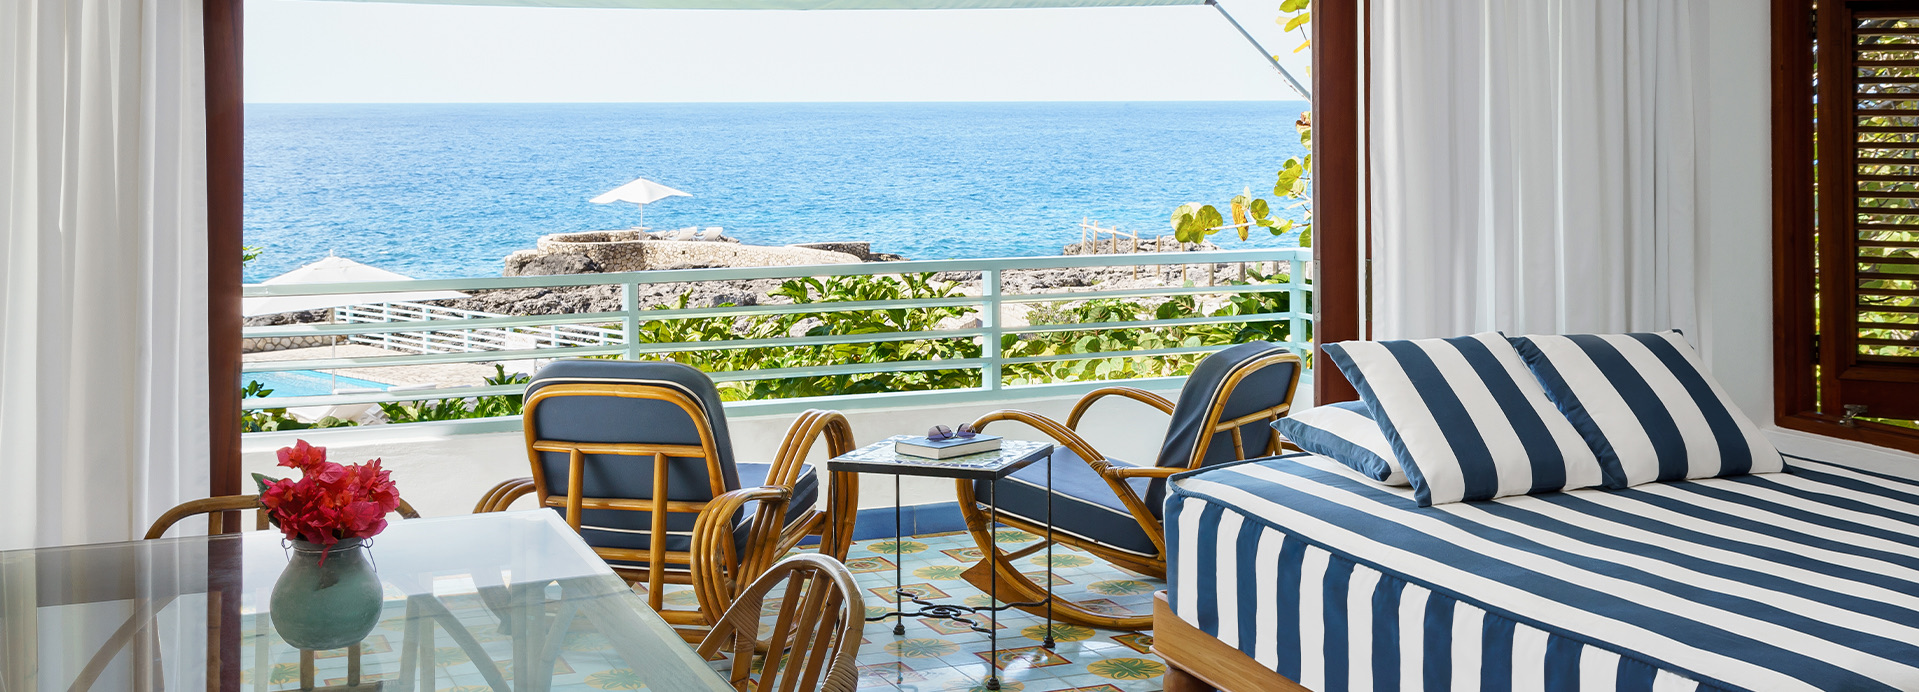 Two brown and blue chairs and a small table on the balcony overlooking the ocean view during the day.